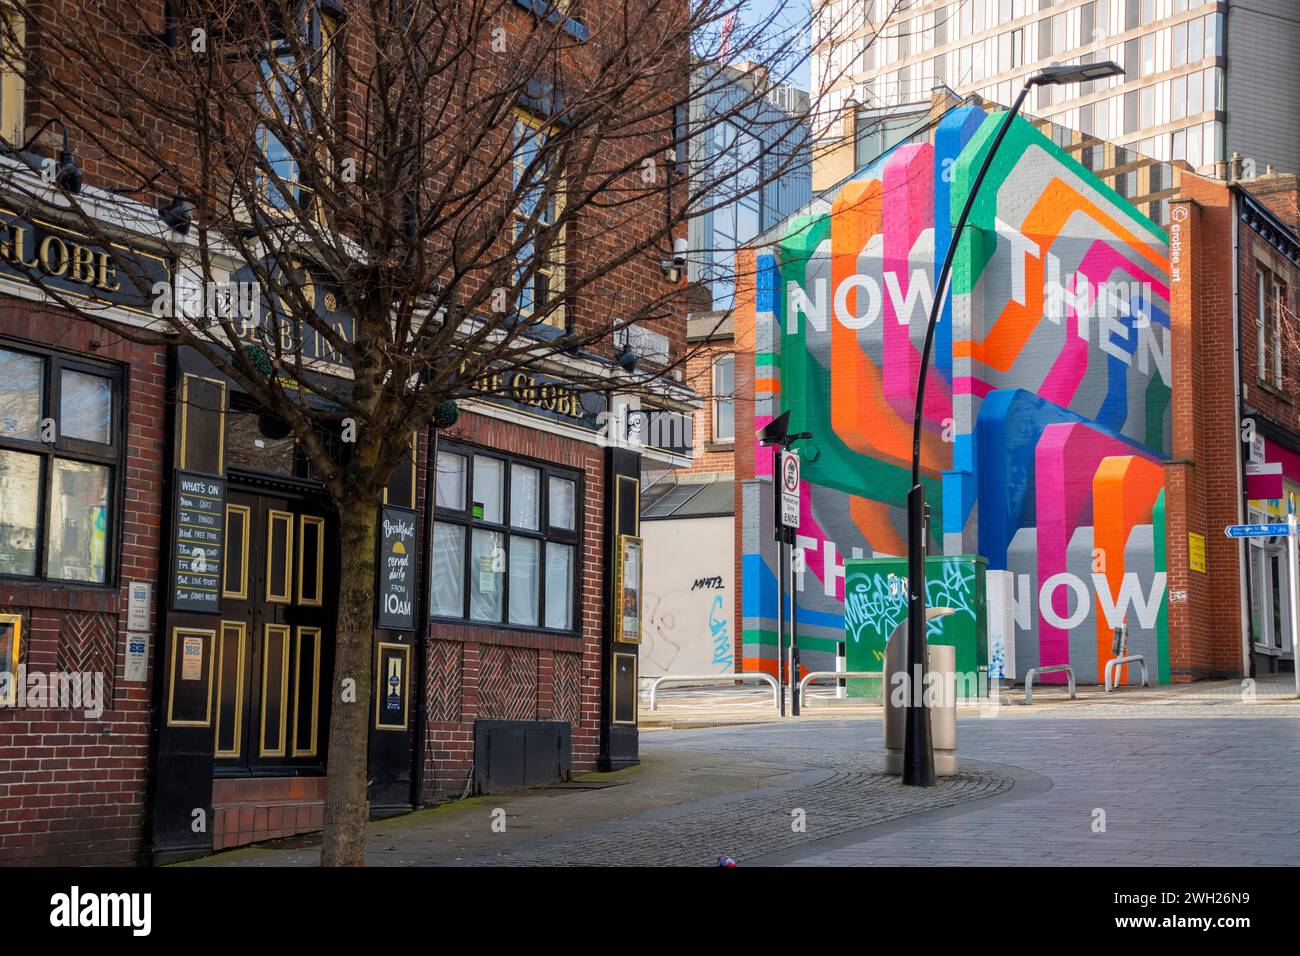 Yorkshire, UK – 27 Dec 2020: Brightly coloured Now Then offices and The Globe public house, Sheffield Stock Photo